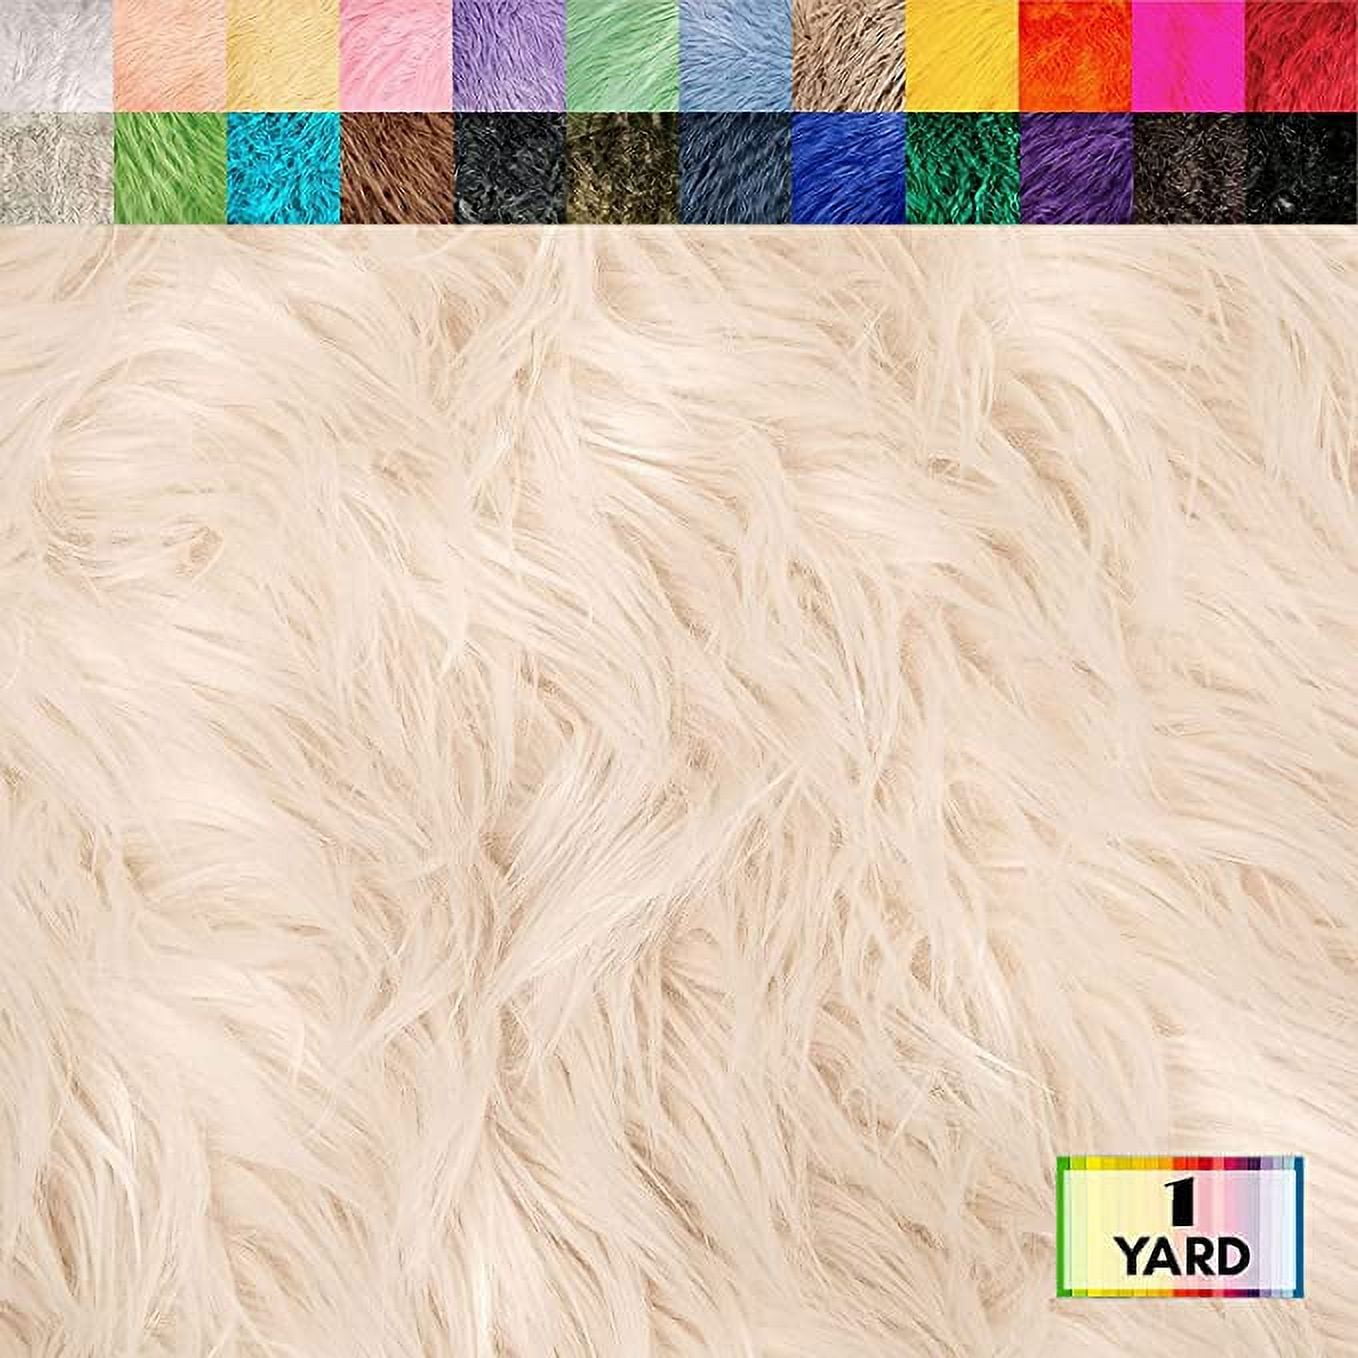 FabricLA Shaggy Faux Fur Fabric by The Yard - 108 x 60 Inches (272 cm x 150 cm) - Craft Furry Fabric for Sewing Apparel, Rugs, P